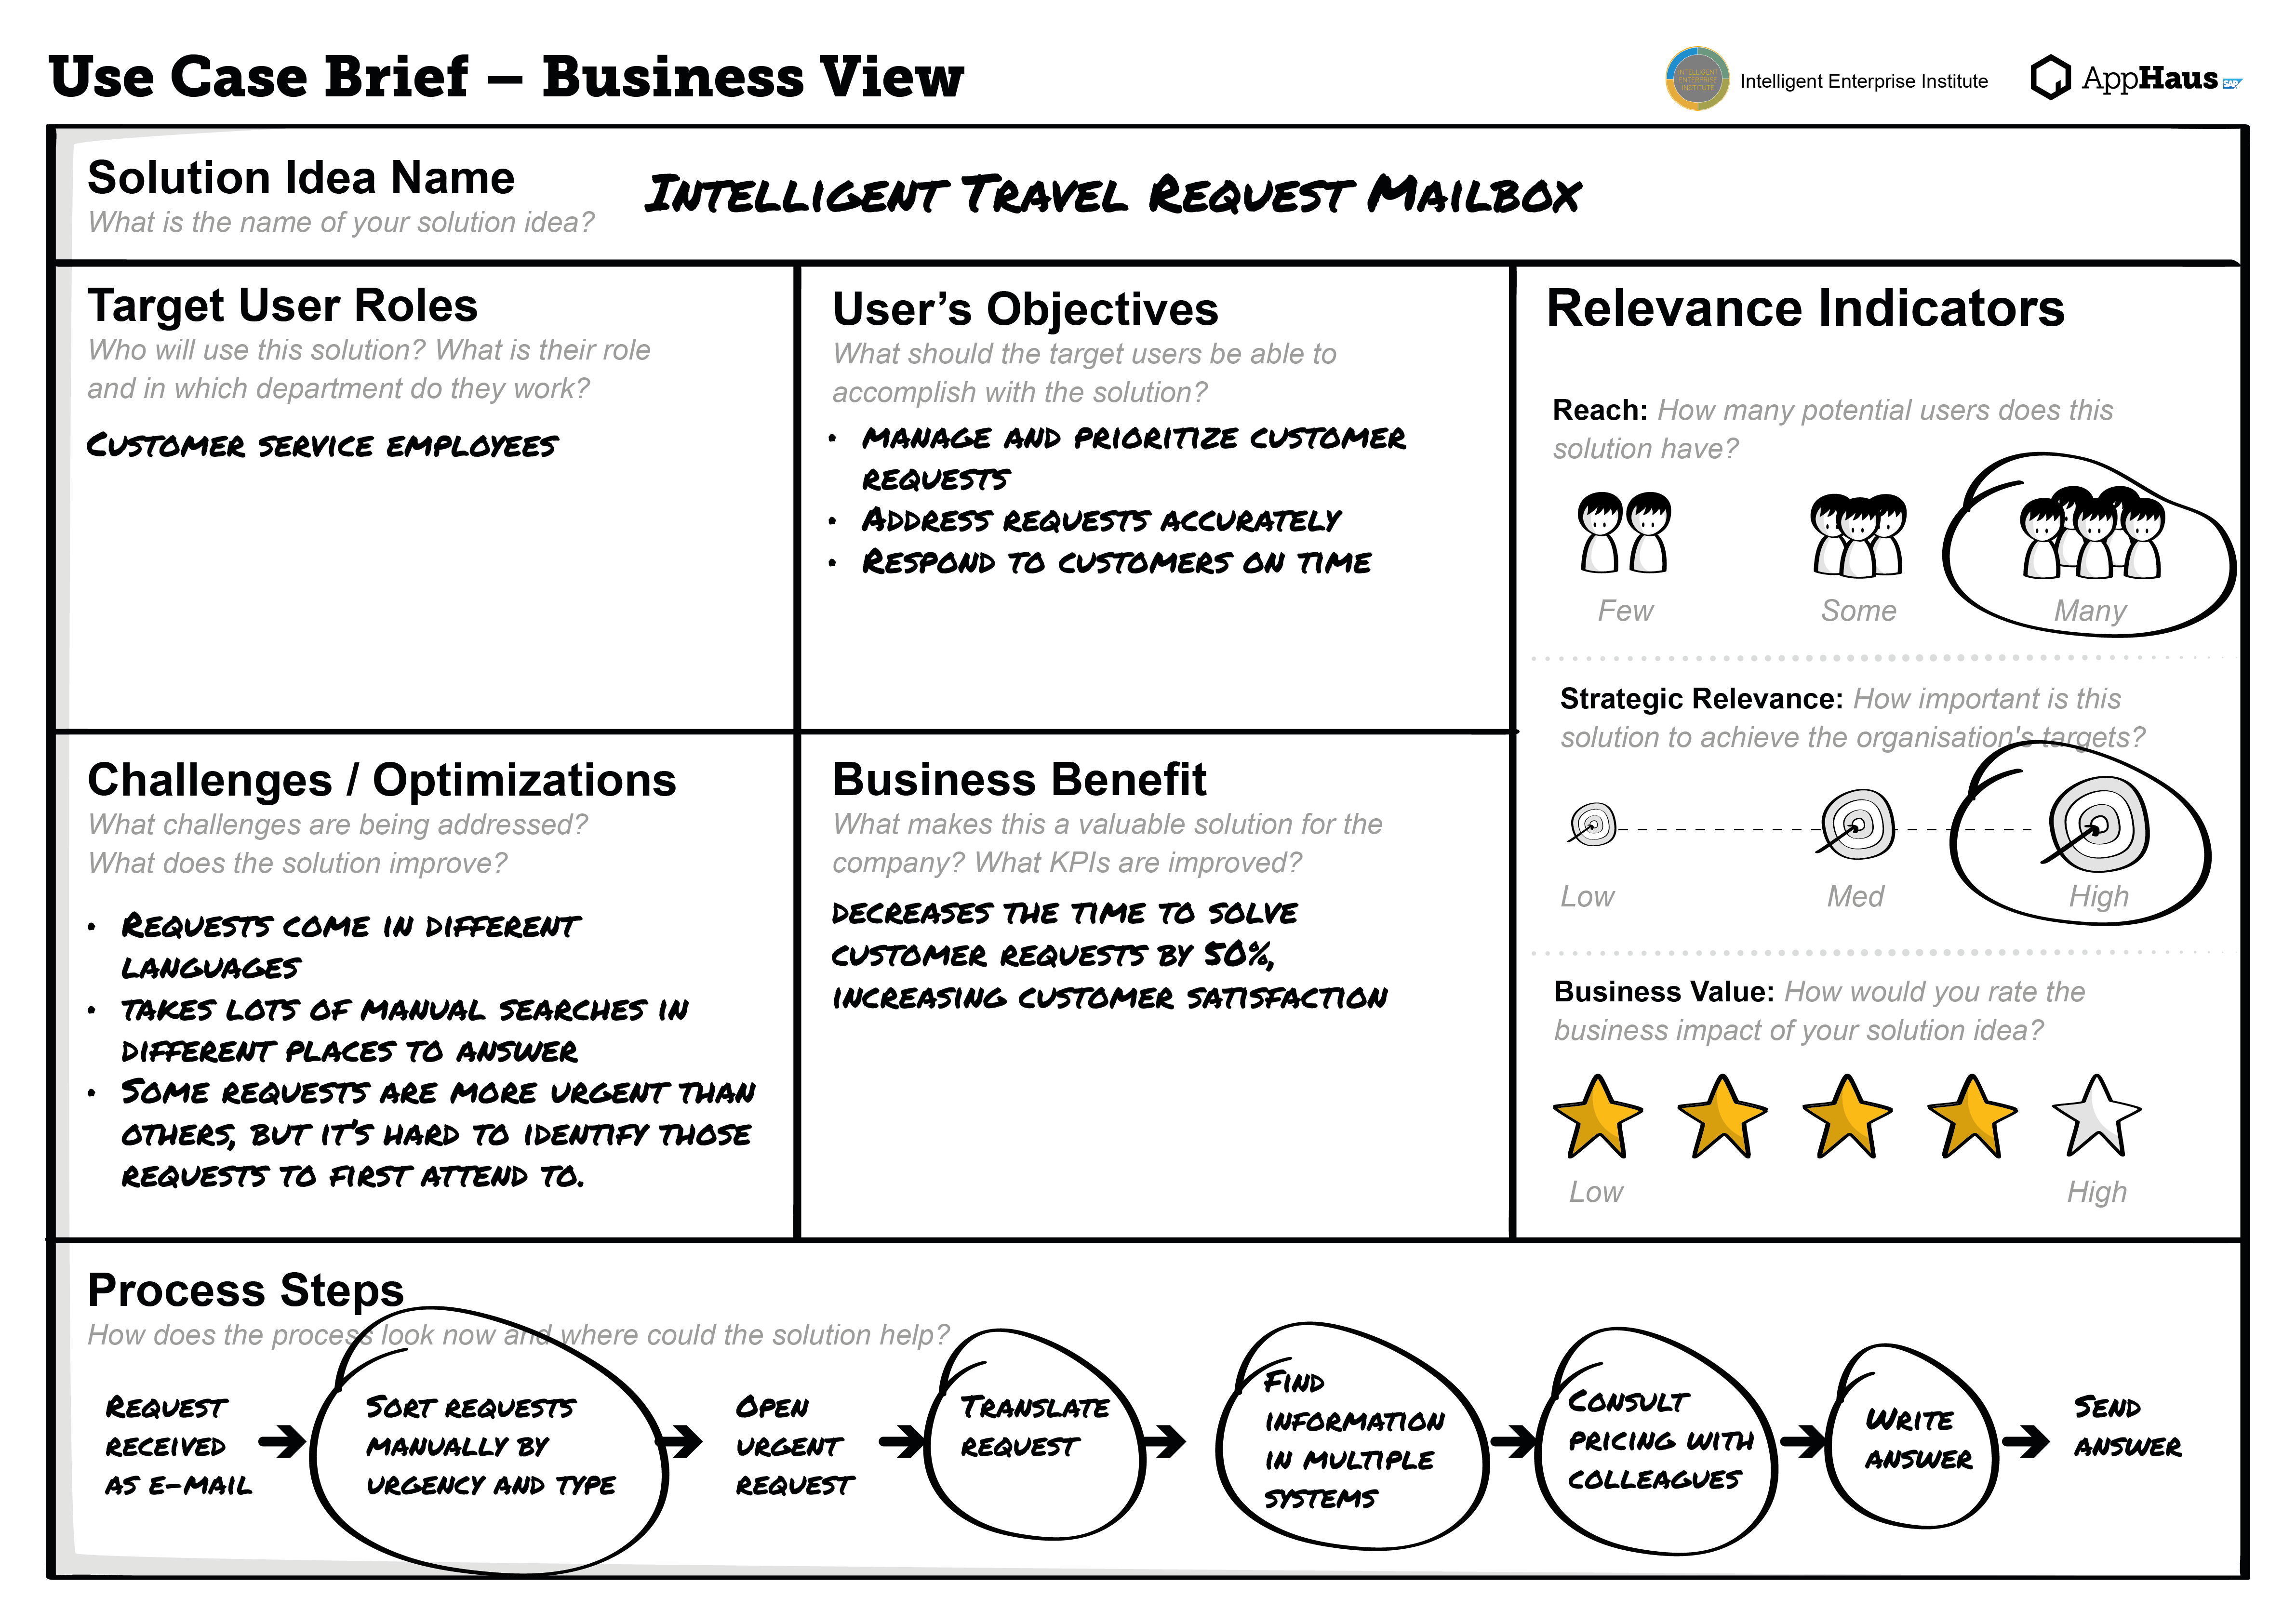 Use Case Brief – Business View Example